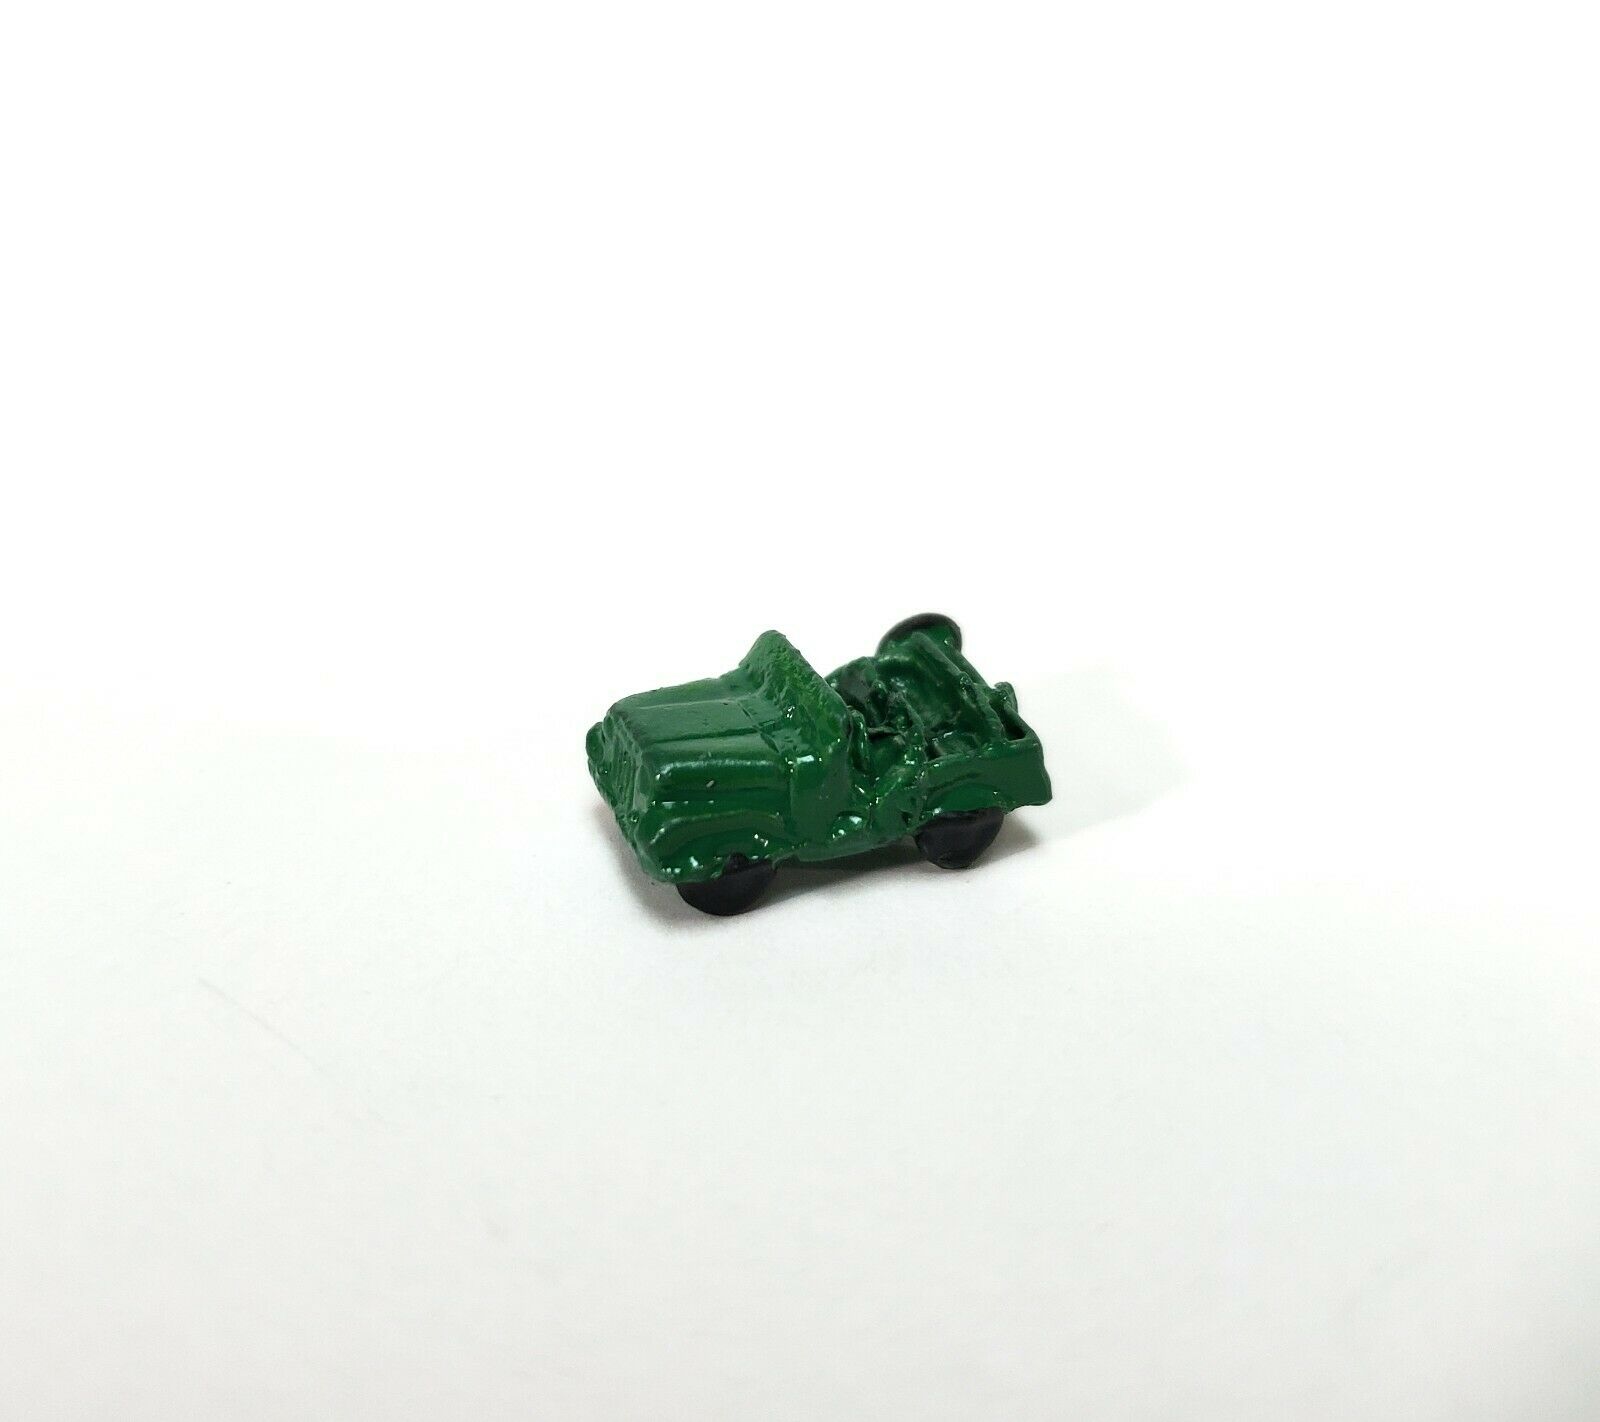 Dollhouse Tiny Jeep Vehicle Toy Green 1:12 Scale Nursery Toys Painted Metal